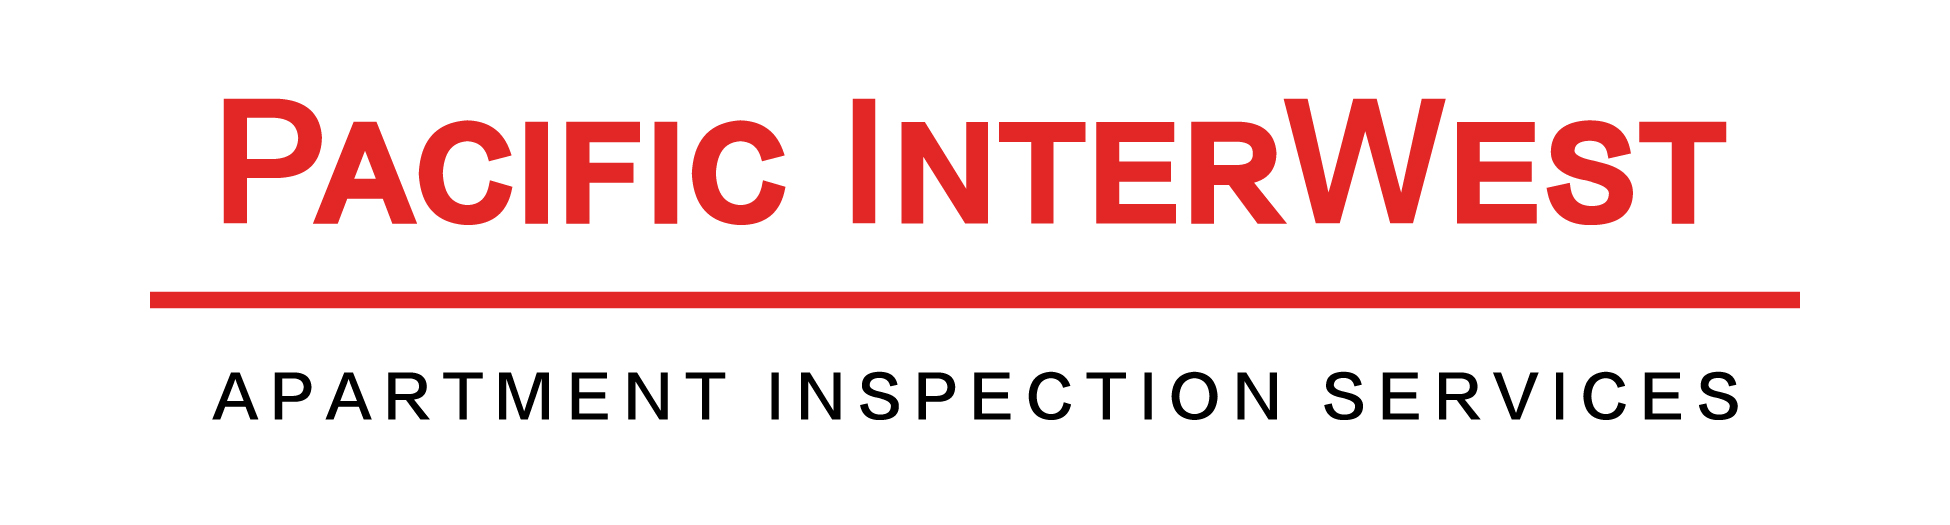 Pacific InterWest Apartment Inspection Services logo